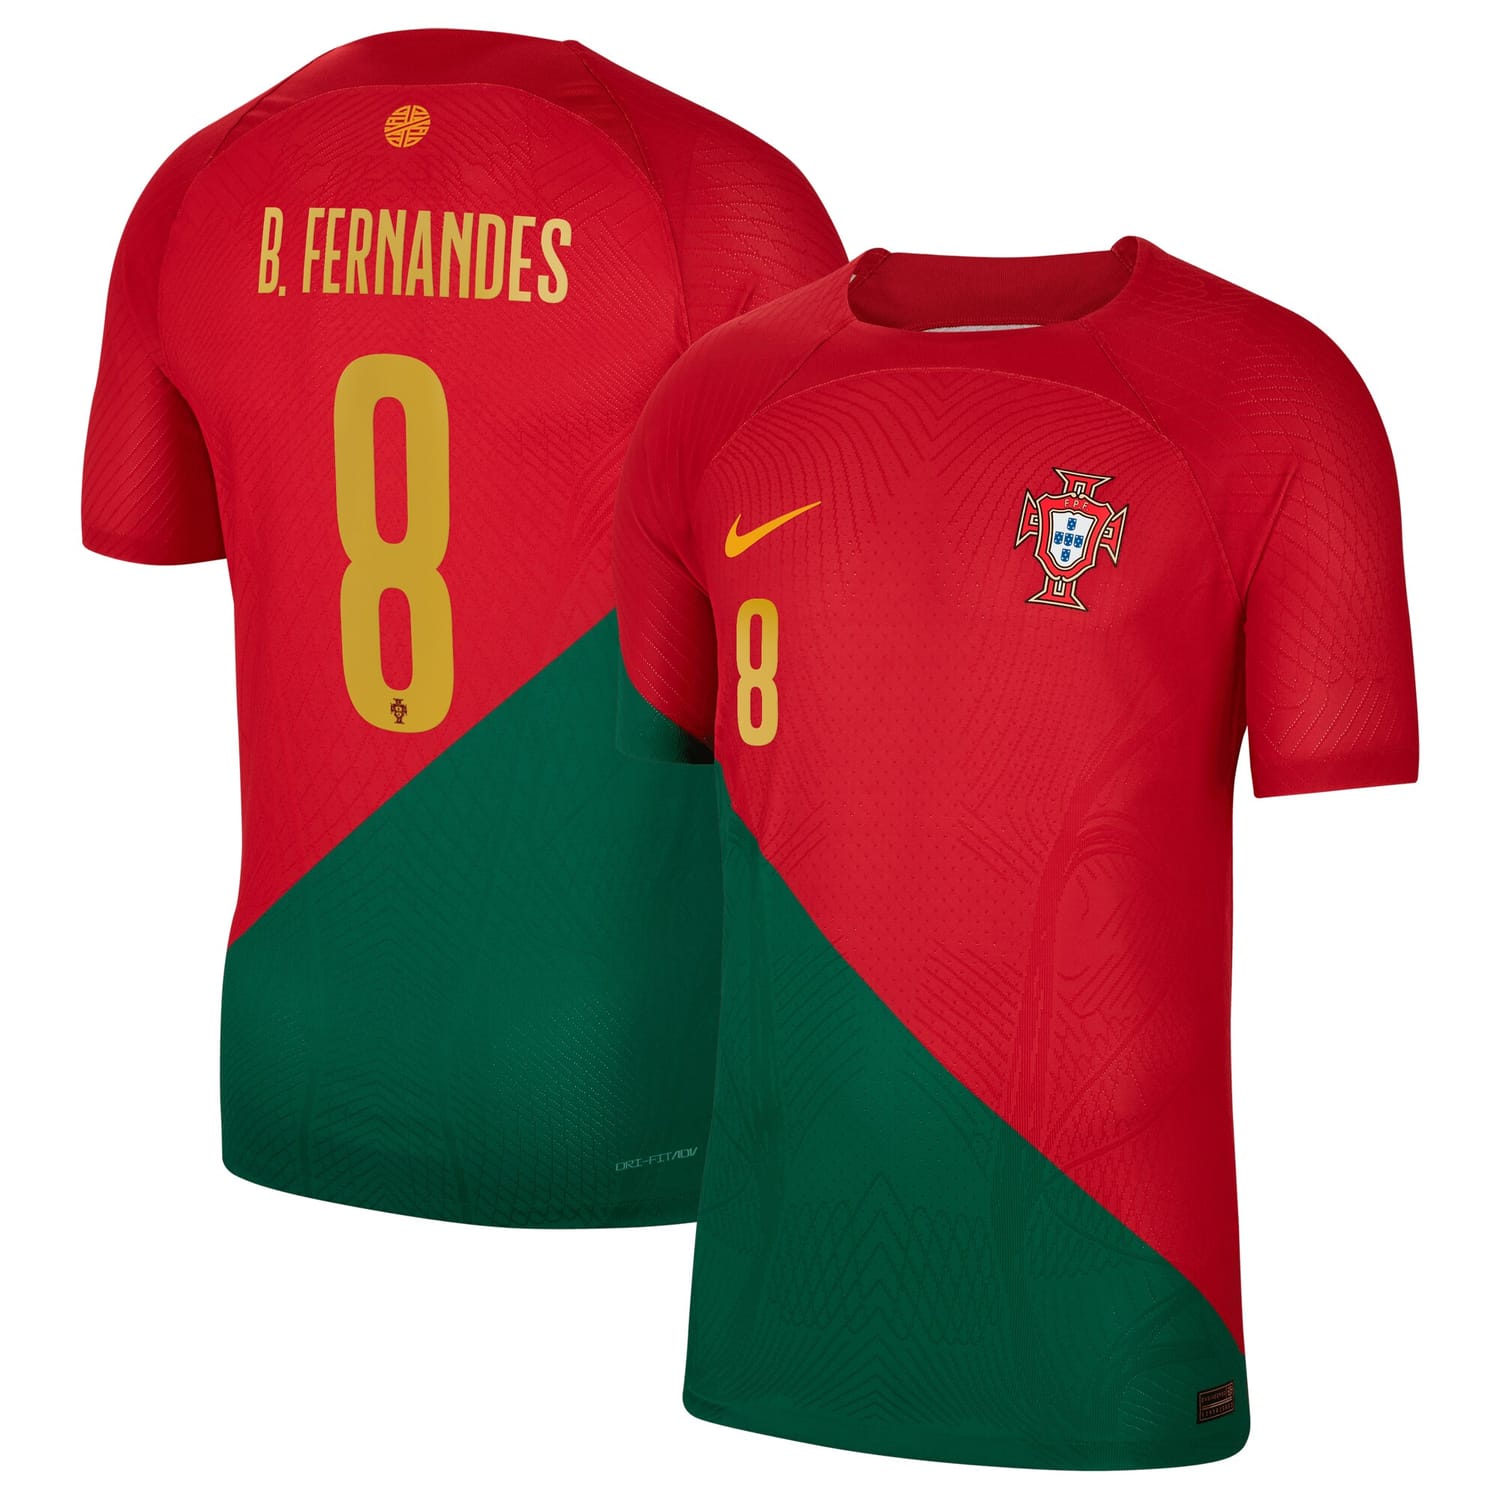 Portugal National Team Home Authentic Jersey Shirt Red 2022-23 player Bruno Fernandes printing for Men